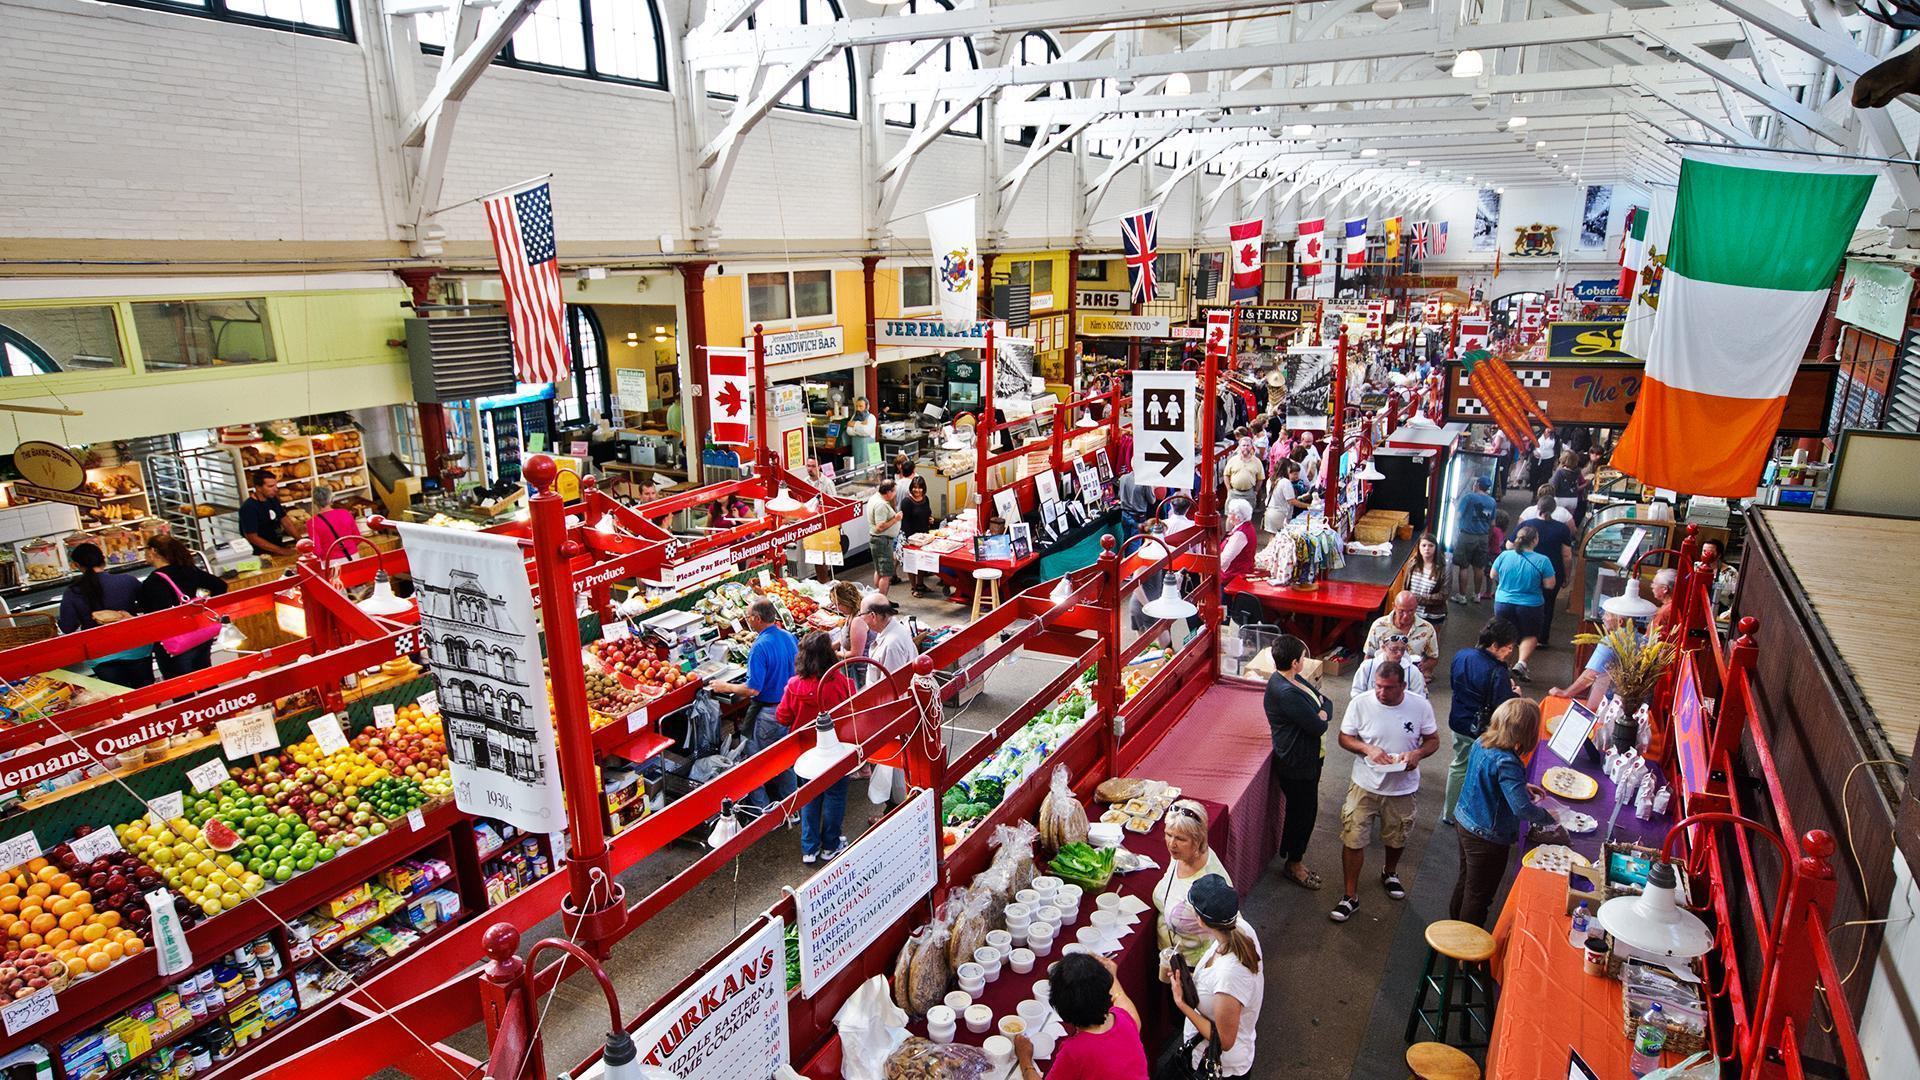 Saint John's City Market is a hub of activity in the Uptown. 